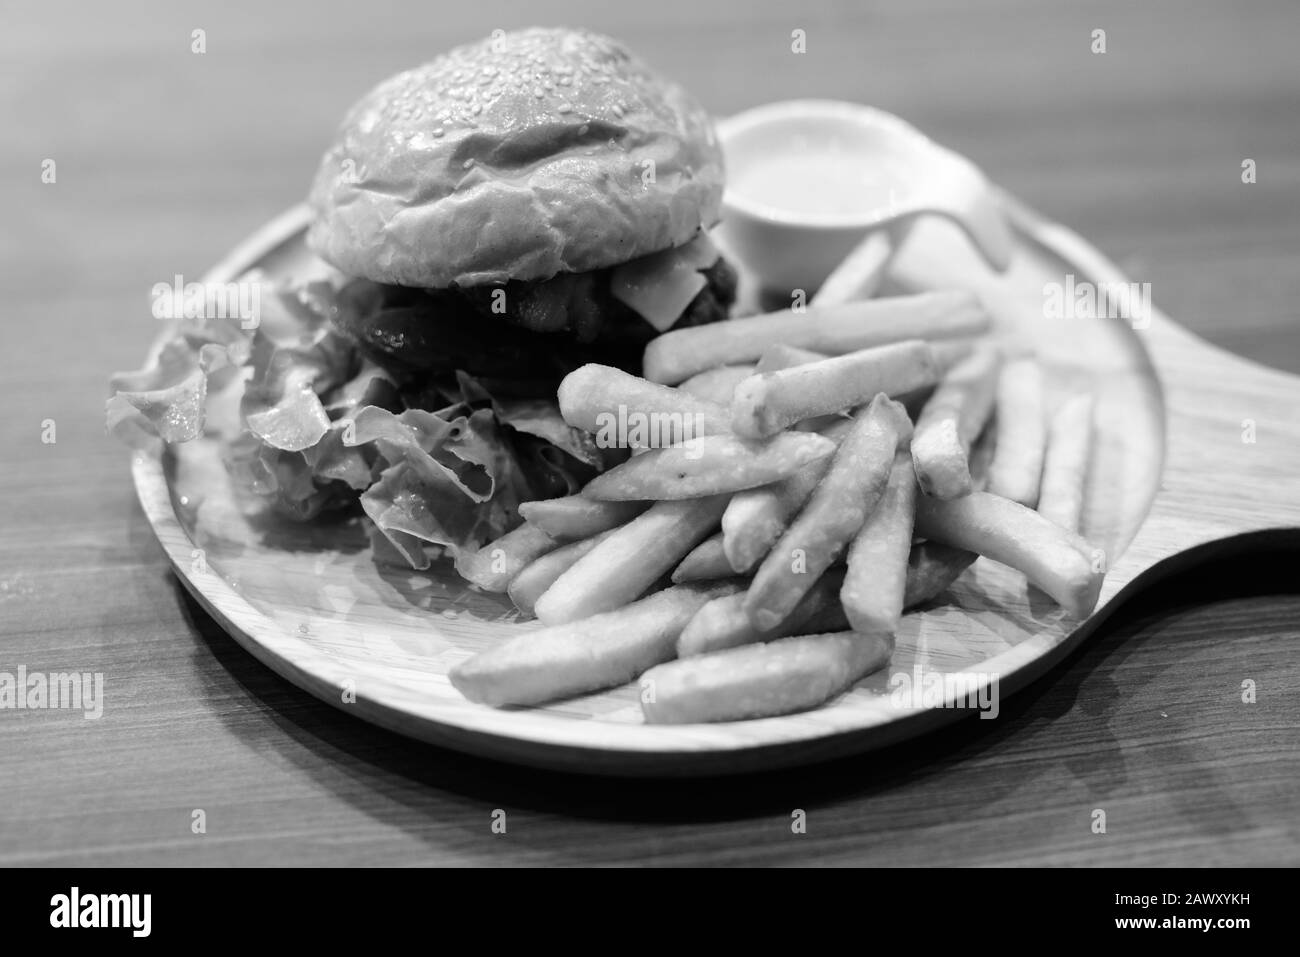 Cheeseburger And French Fries Served On Wooden Table Stock Photo